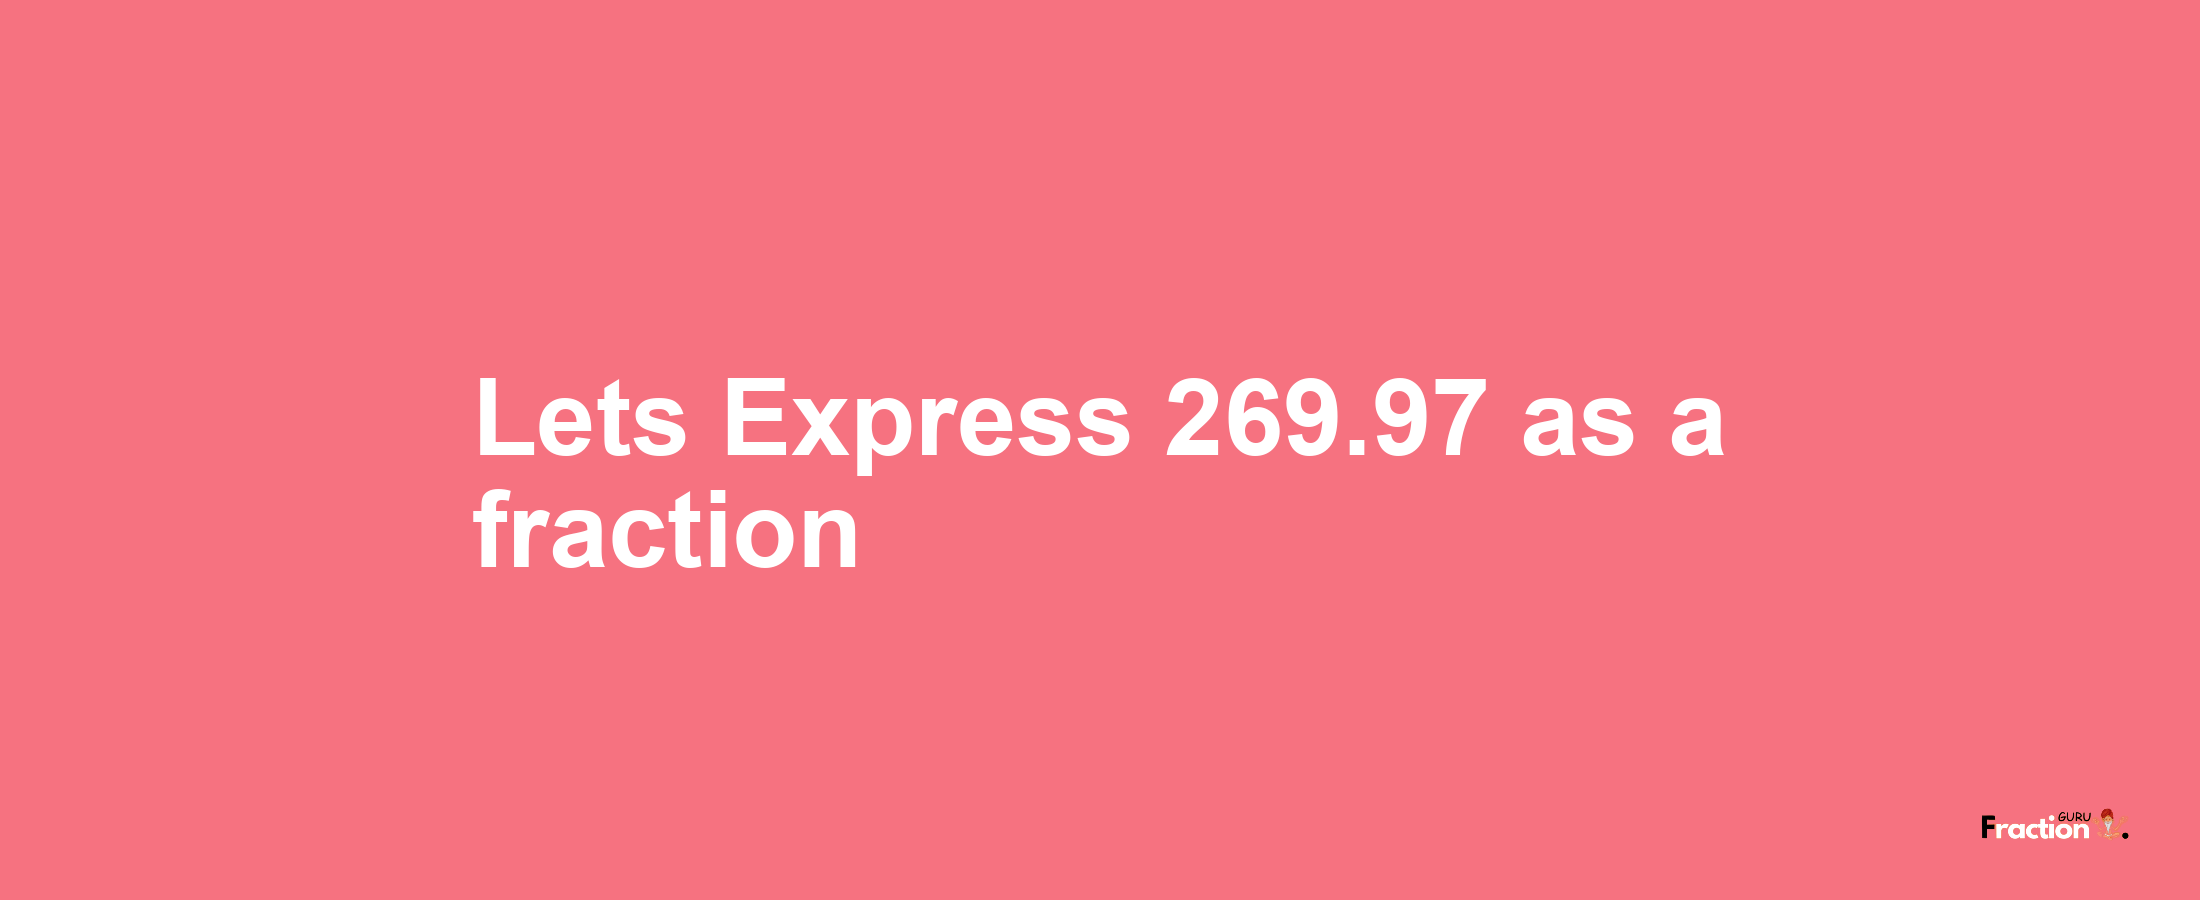 Lets Express 269.97 as afraction